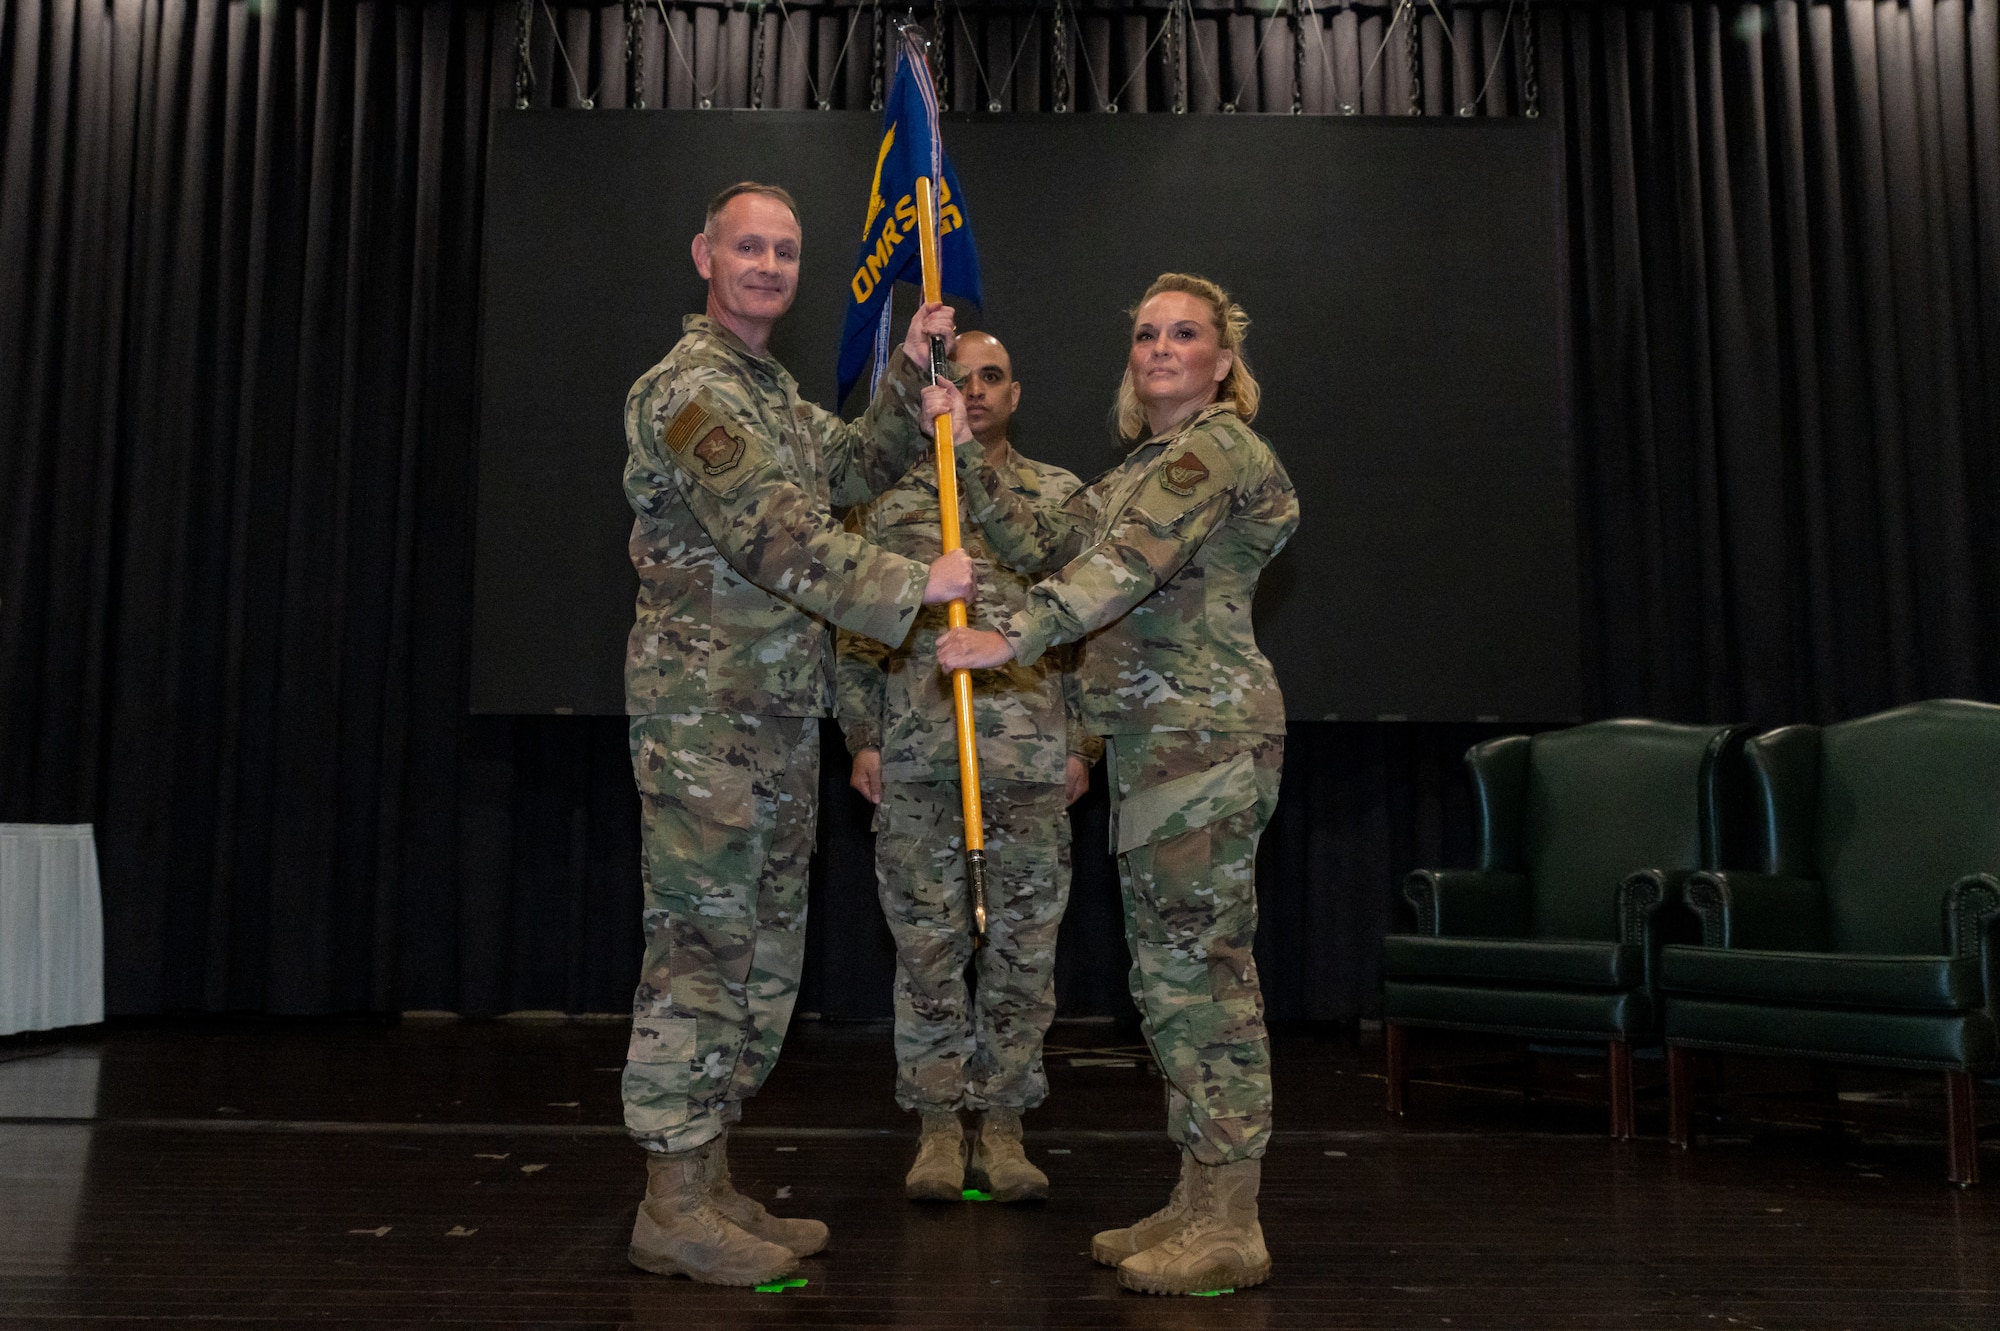 Col. Michael Fea, 51st Medical Group commander, left, passes the guidon to Lt. Col. Shannon Hunt, 51st Operational Medical Readiness Squadron commander at Osan Air Base, Republic of Korea, June 29, 2021. As the presiding officer, Fea facilitated the transition of 51 OMRS command by presenting the ceremonial guidon to the incoming officer. (U.S. Air Force photo by Tech. Sgt. Nicholas Alder)